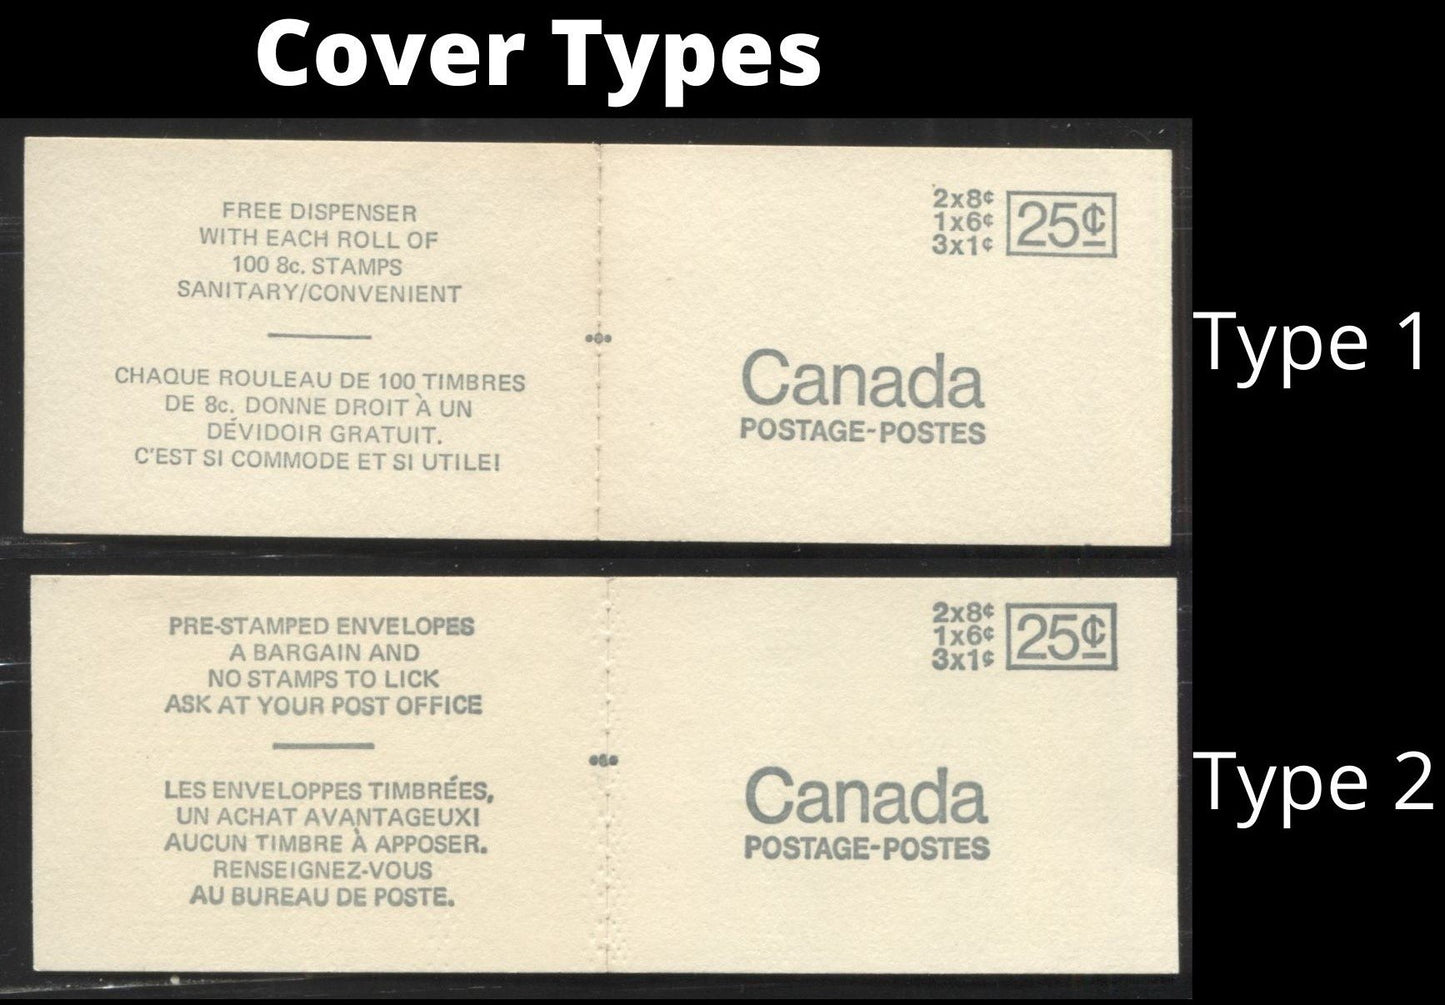 Lot #71 Canada McCann #BK69ab 1c Purple Brown, 6c Black, And 8c Slate, 1967-1973 Centennial Issue, A Specialized Lot of Three 25c Booklets, Type 3 Covers Black Sealing Strip, LF-fl Vertical Ribbed and Smooth Papers, Settings B & C As Described in Harris